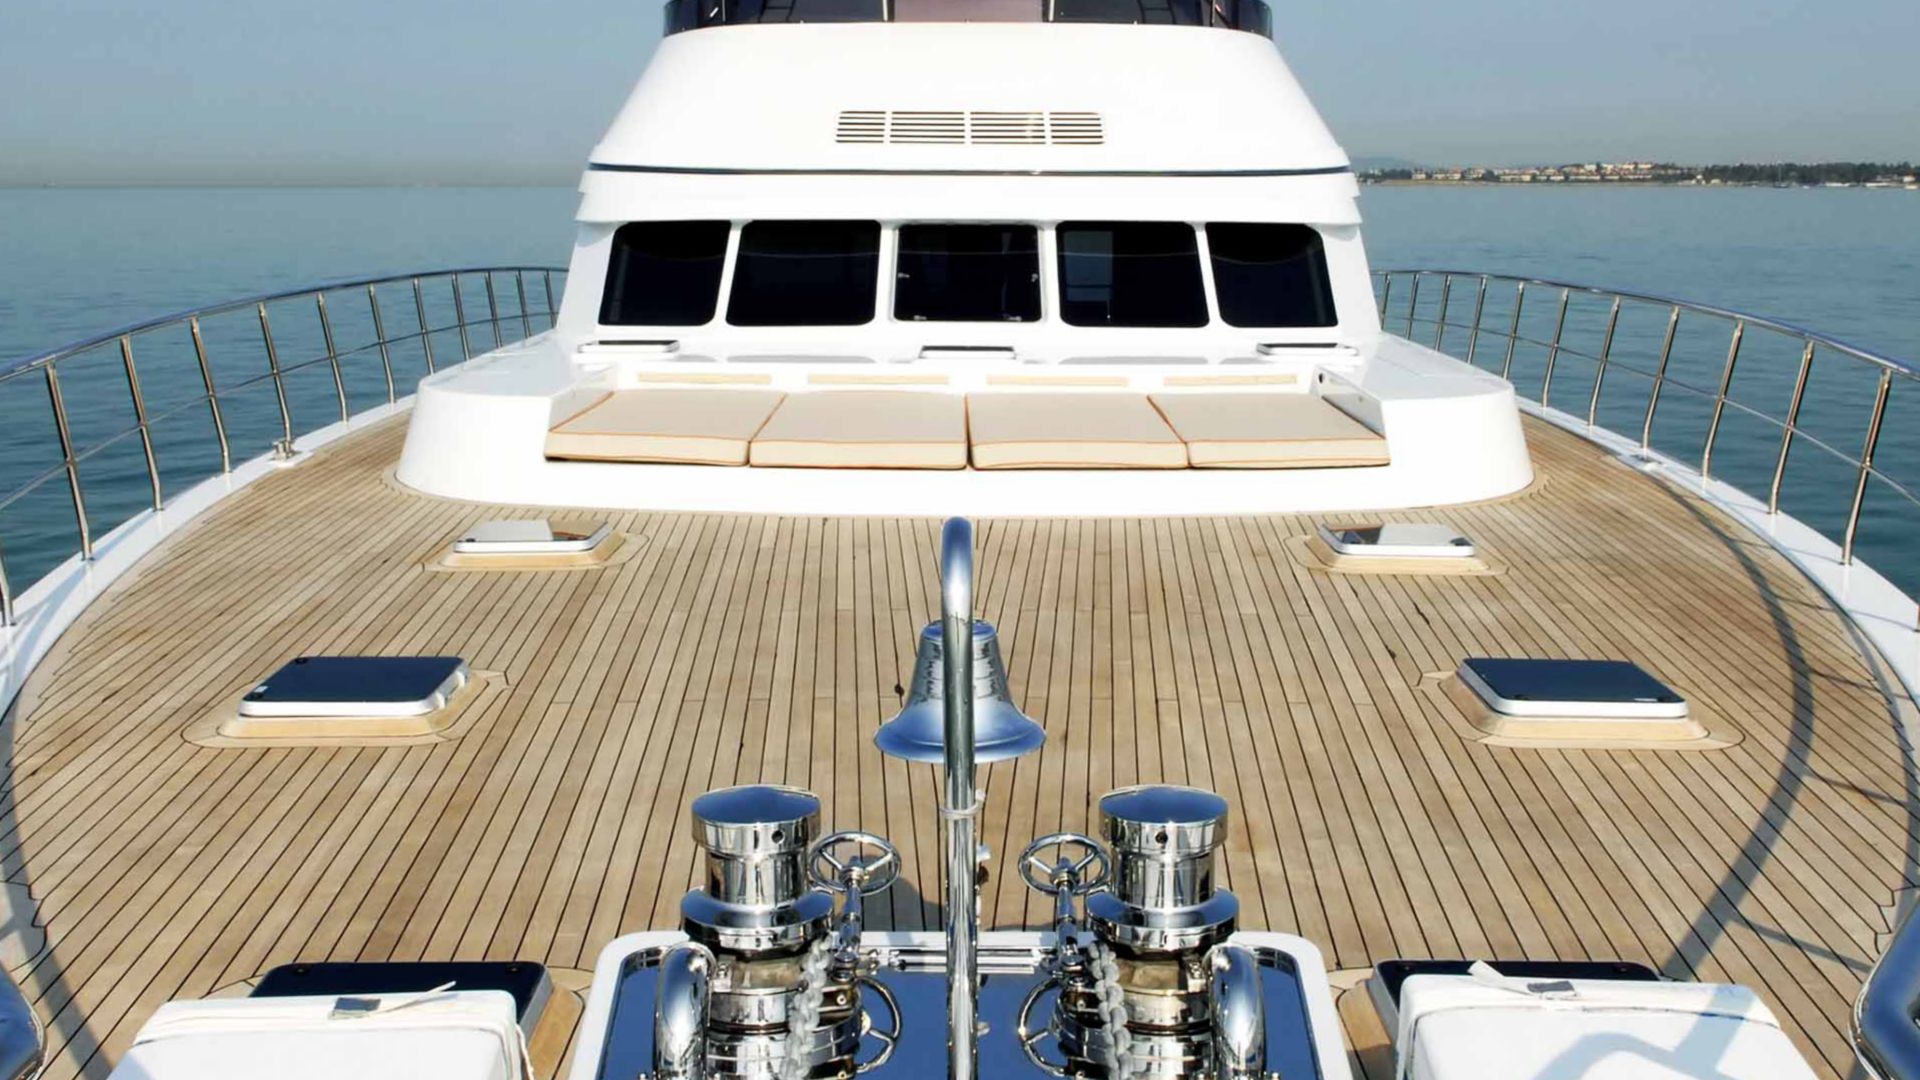 Marine synthetic teak decking systems